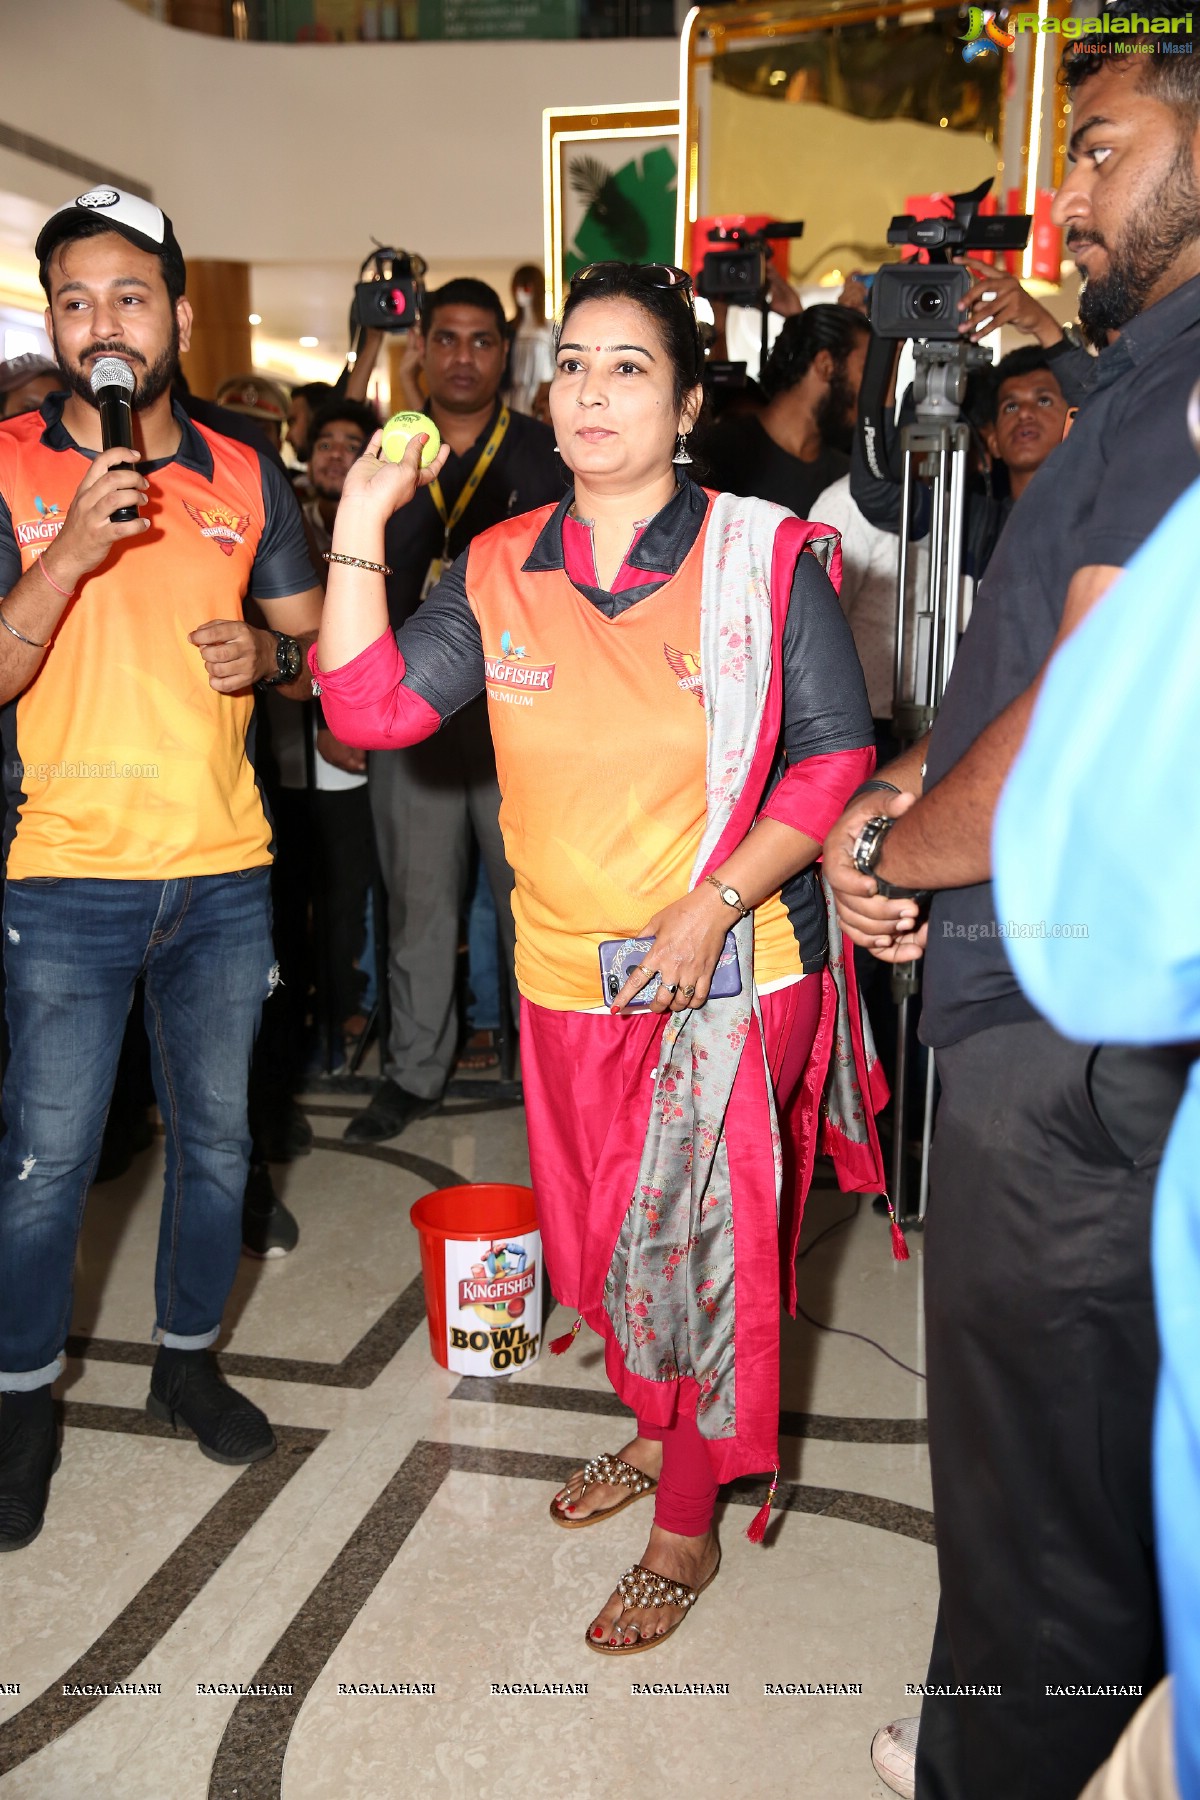 ‘Kingfisher Bowl Out’ Gives Sunrisers Hyderabad Fans a Lucky Chance At Inorbit Mall In Hyderabad